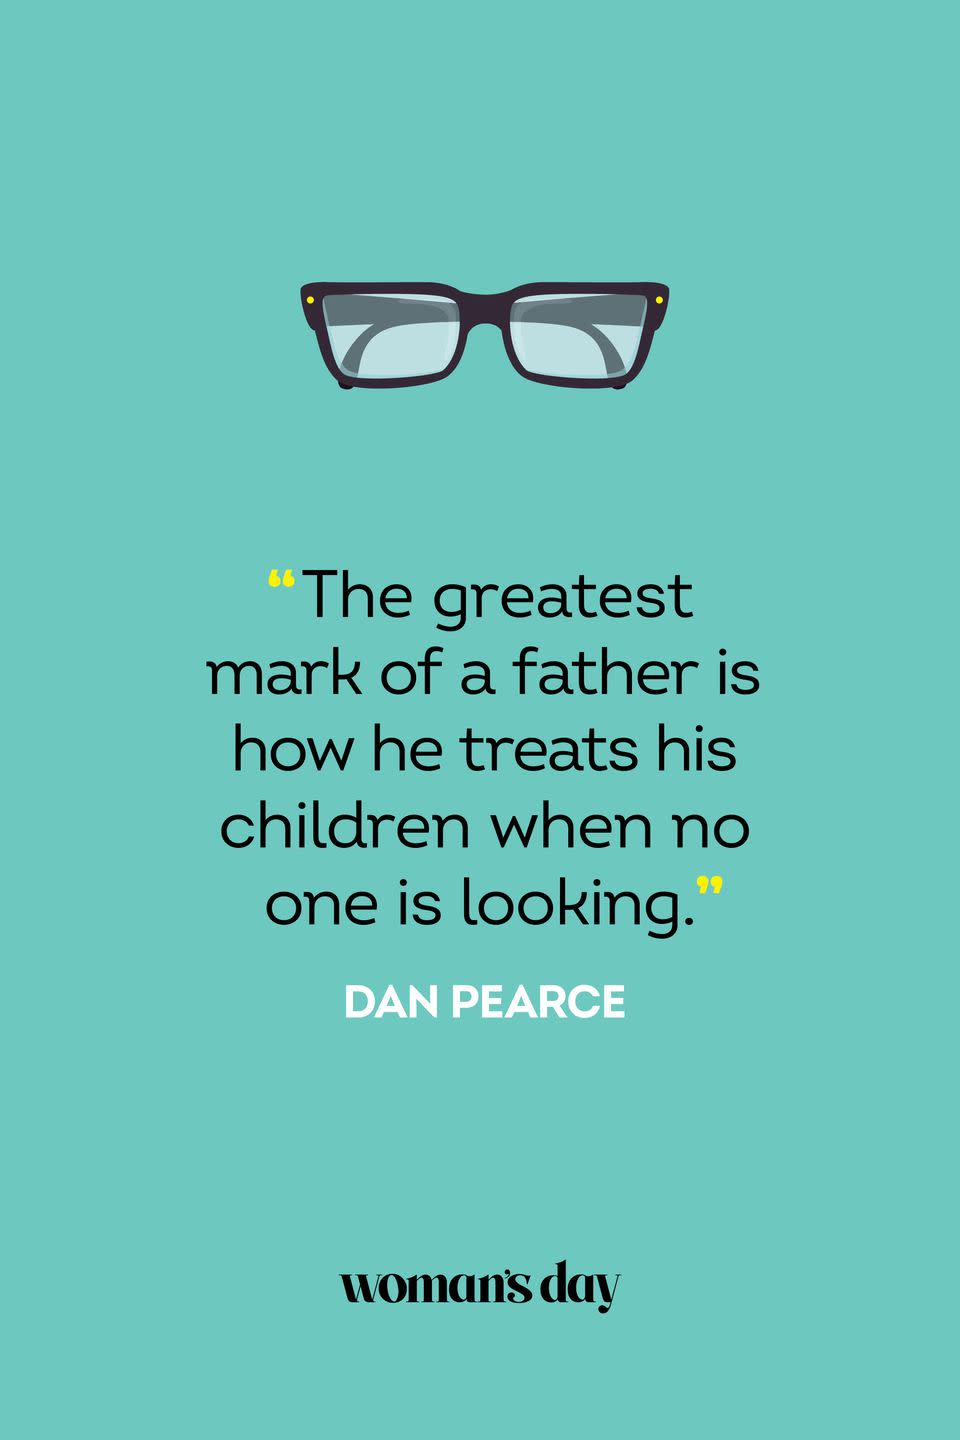 fathers day quotes dan pearce